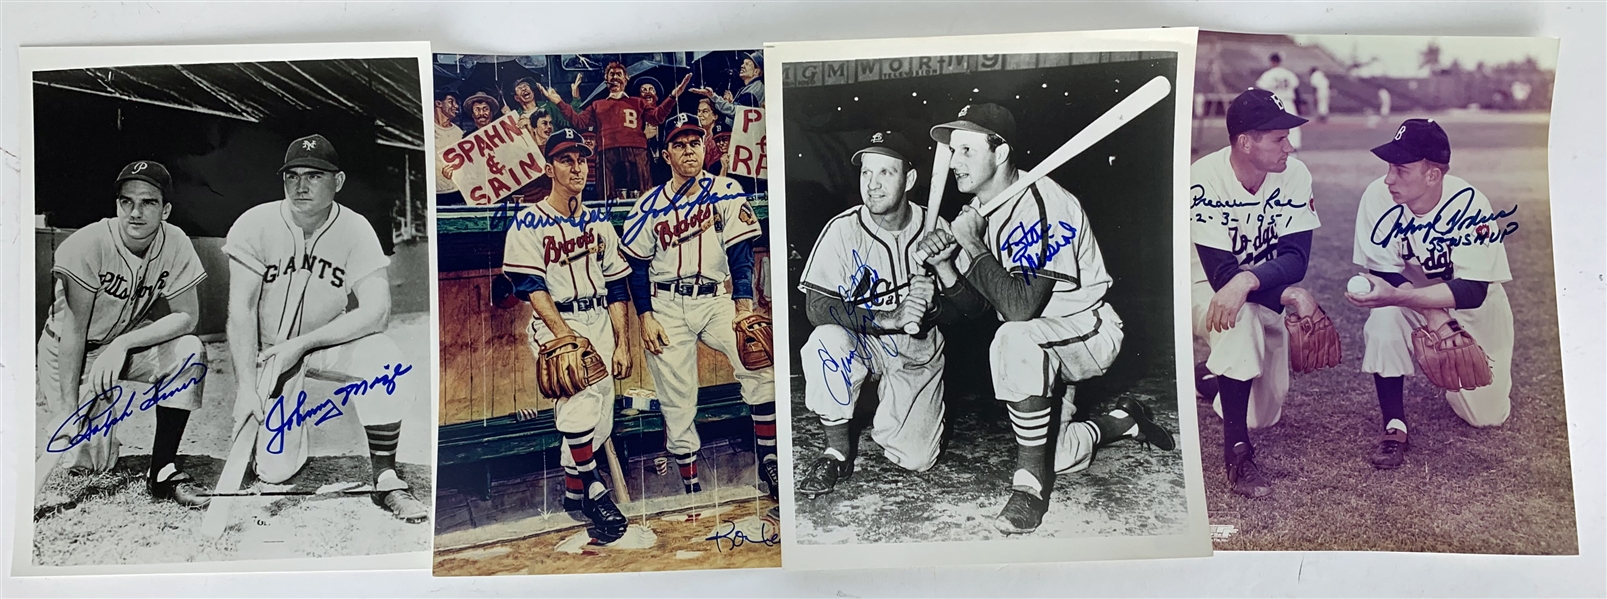 MLB Greats Lot of Four (4) Dual Signed 8" x 10" Photos w/ Musial, Mize & Others (Beckett/BAS Guaranteed)